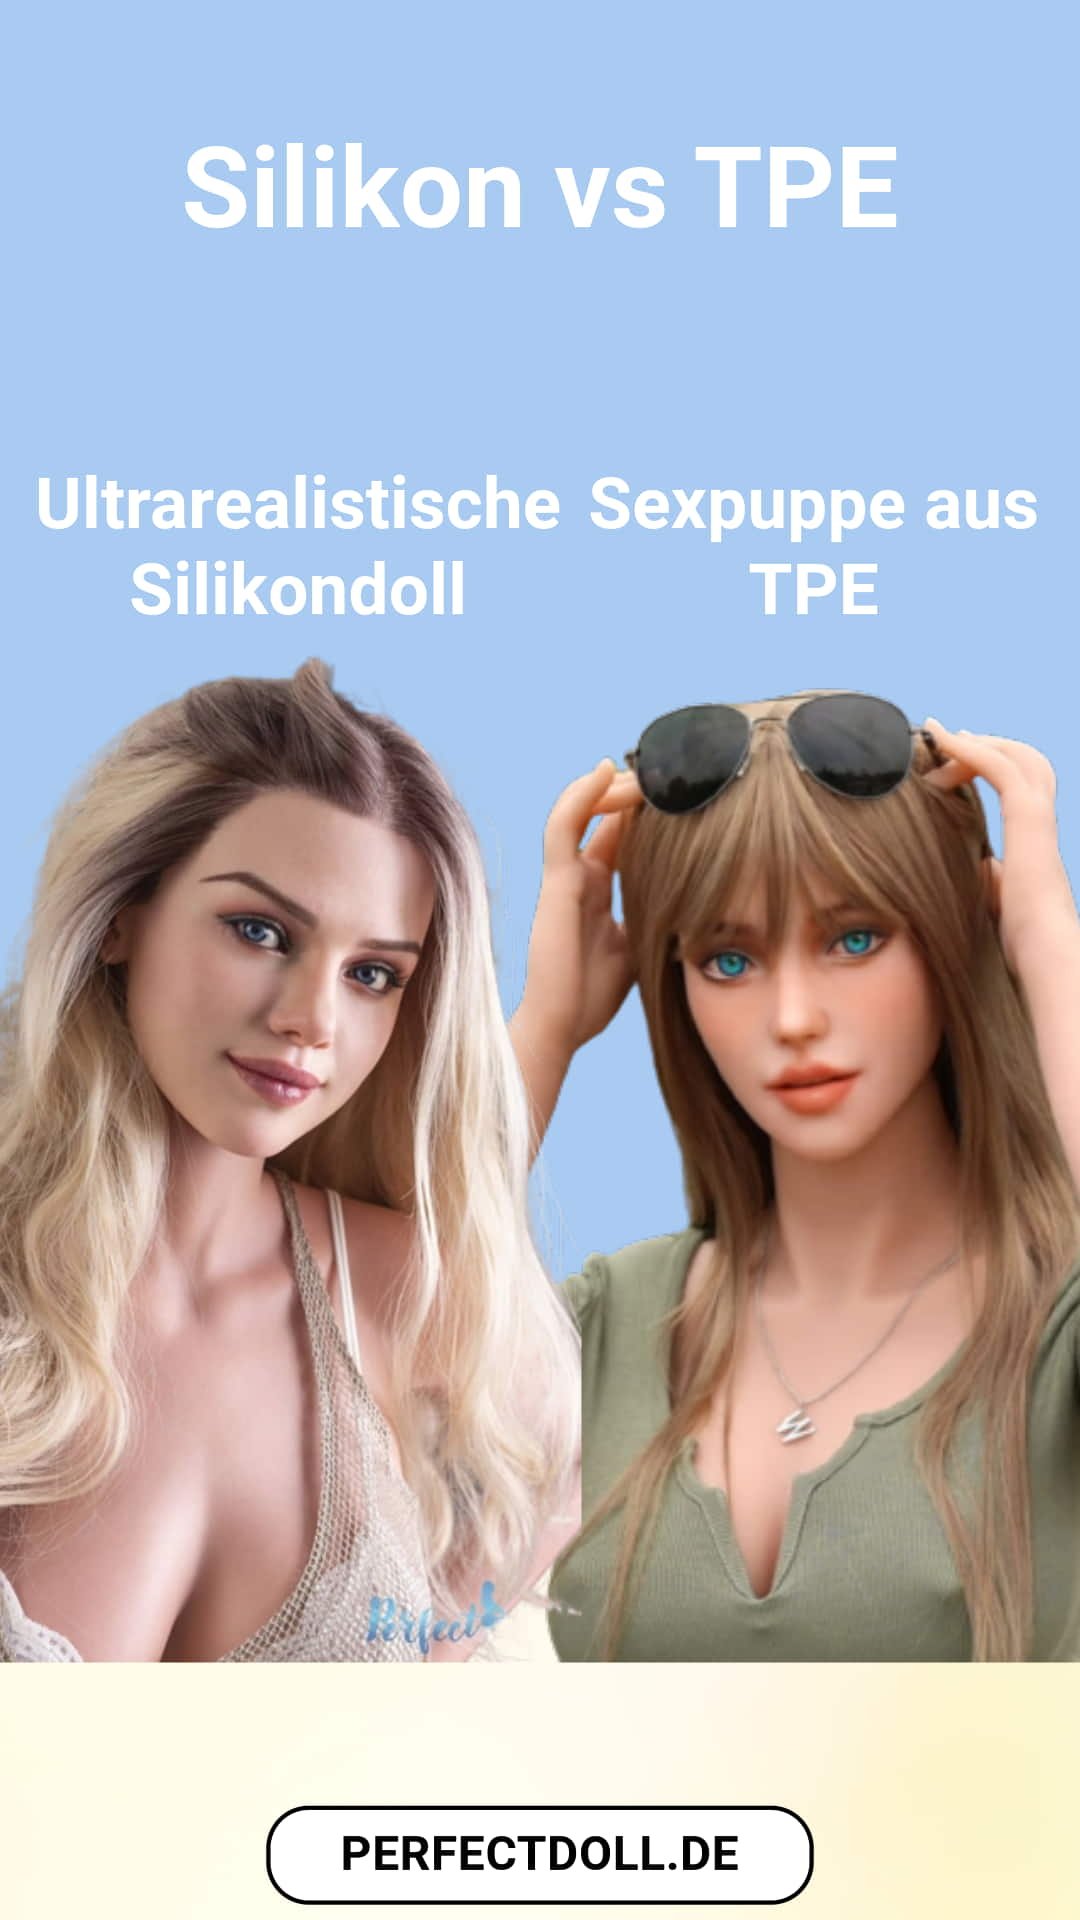 sexdoll comparison tpe and silicone Perfectdoll | Your #1 shop for lovedolls & more